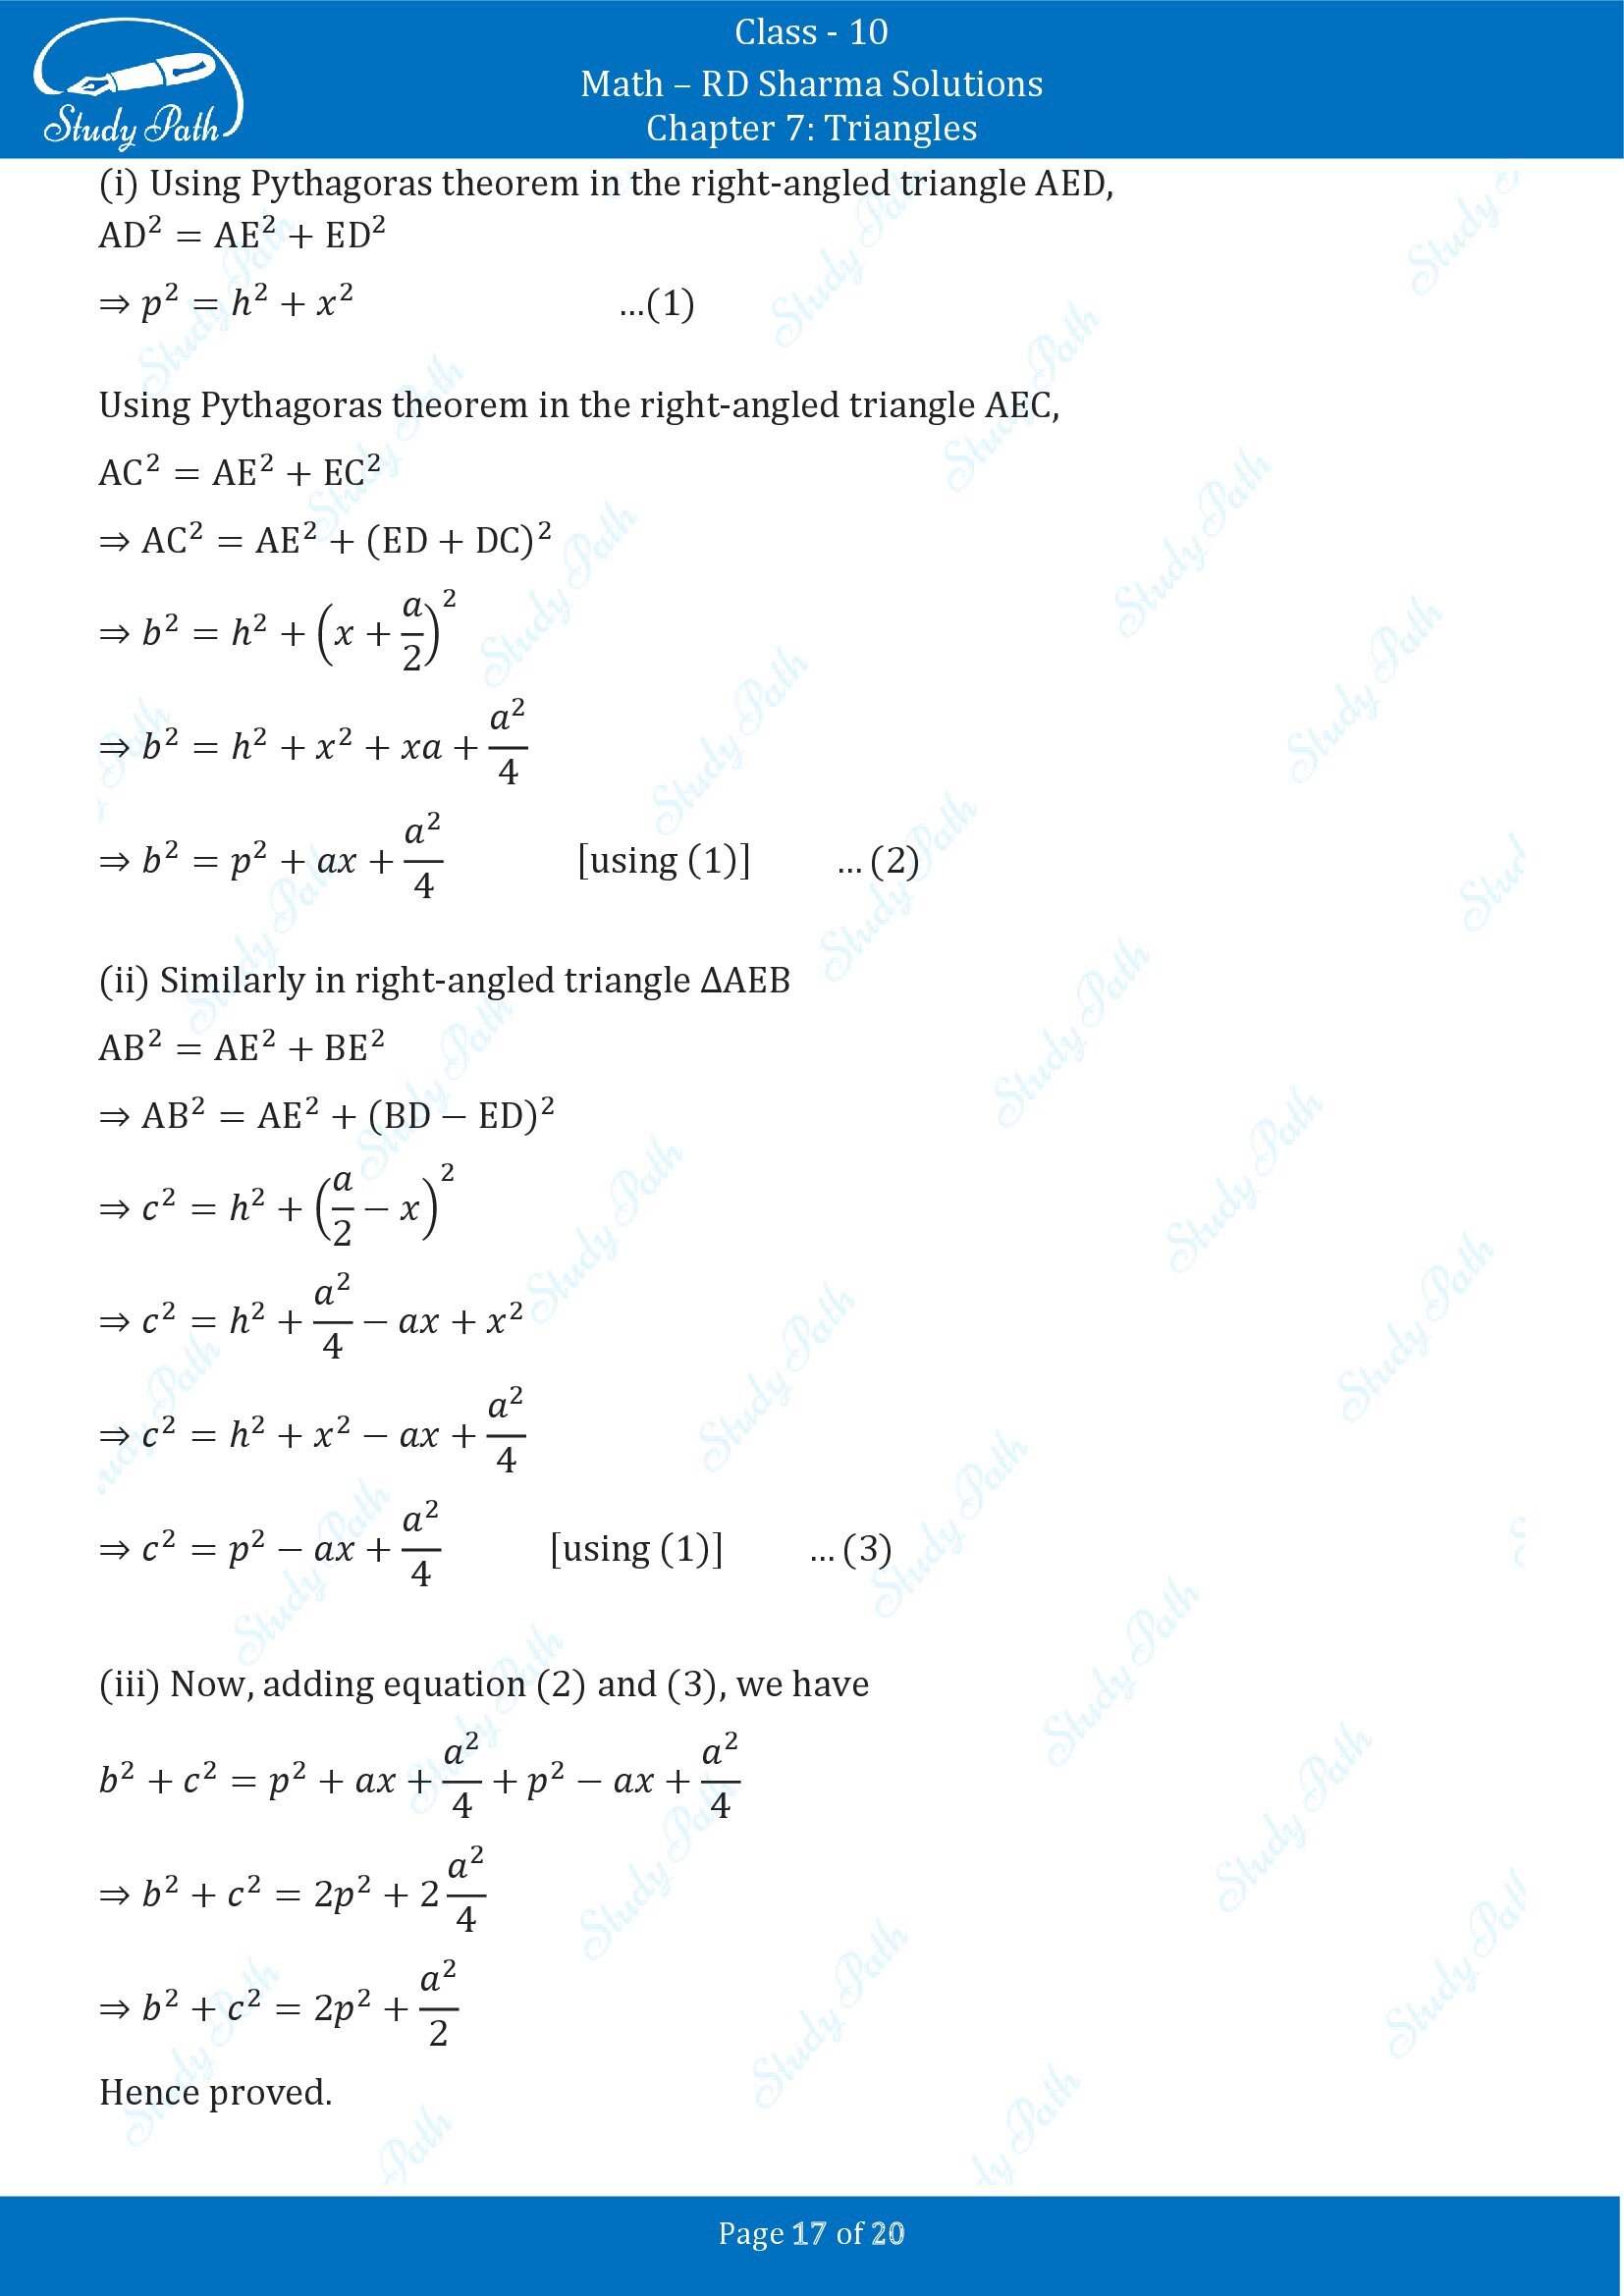 RD Sharma Solutions Class 10 Chapter 7 Triangles Exercise 7.7 00017